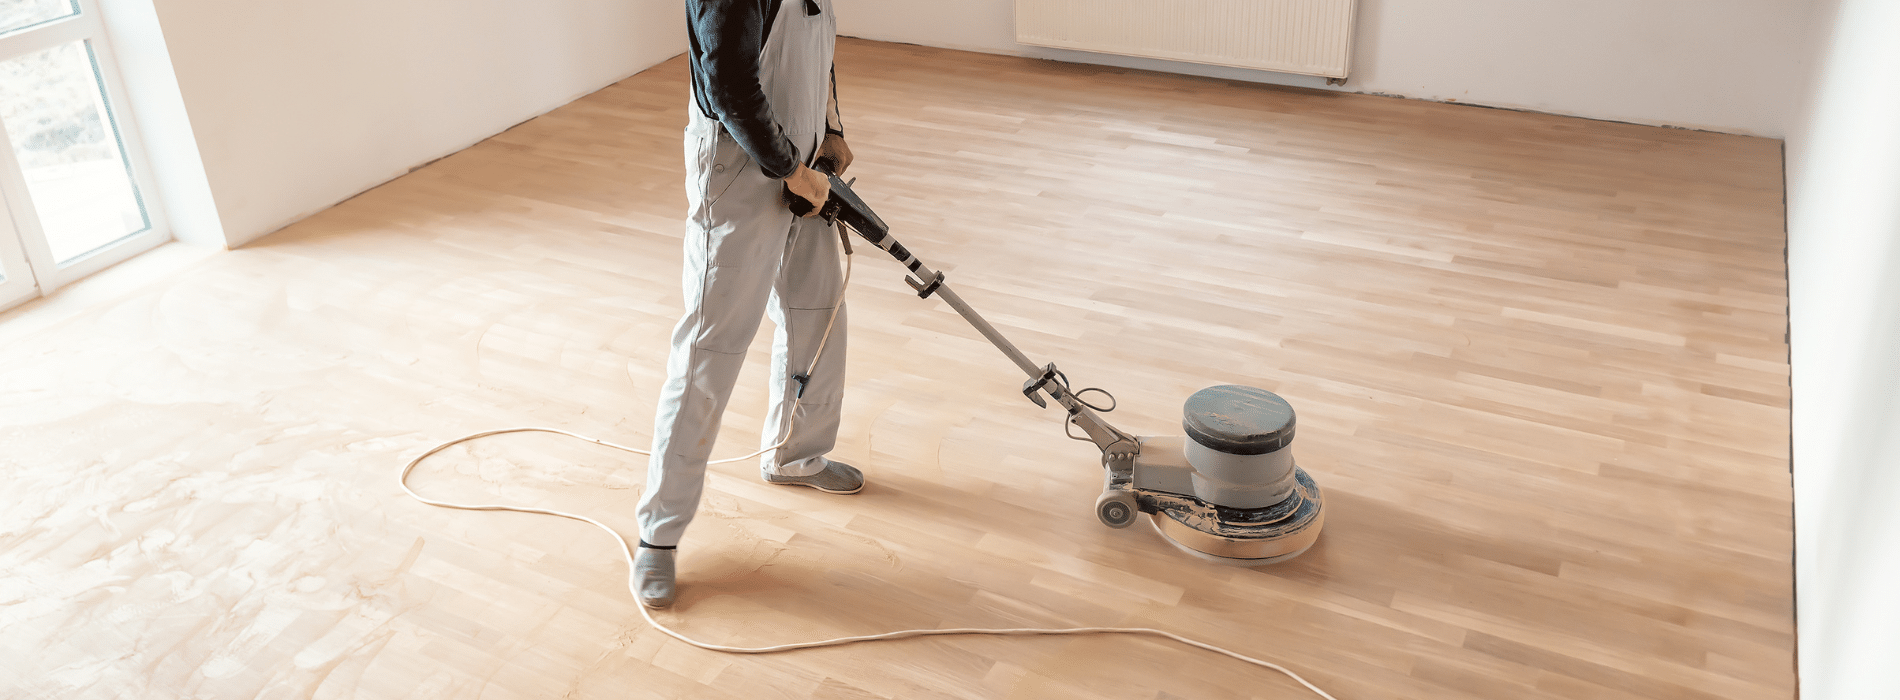 Expert herringbone floor sanding by Mr Sander® using Effect 2200 (Voltage: 210, Frequency: 50). Experience flawless results on your 250x750 mm herringbone floor. Bona belt sander and HEPA-filtered dust extraction ensure cleanliness and exceptional craftsmanship.